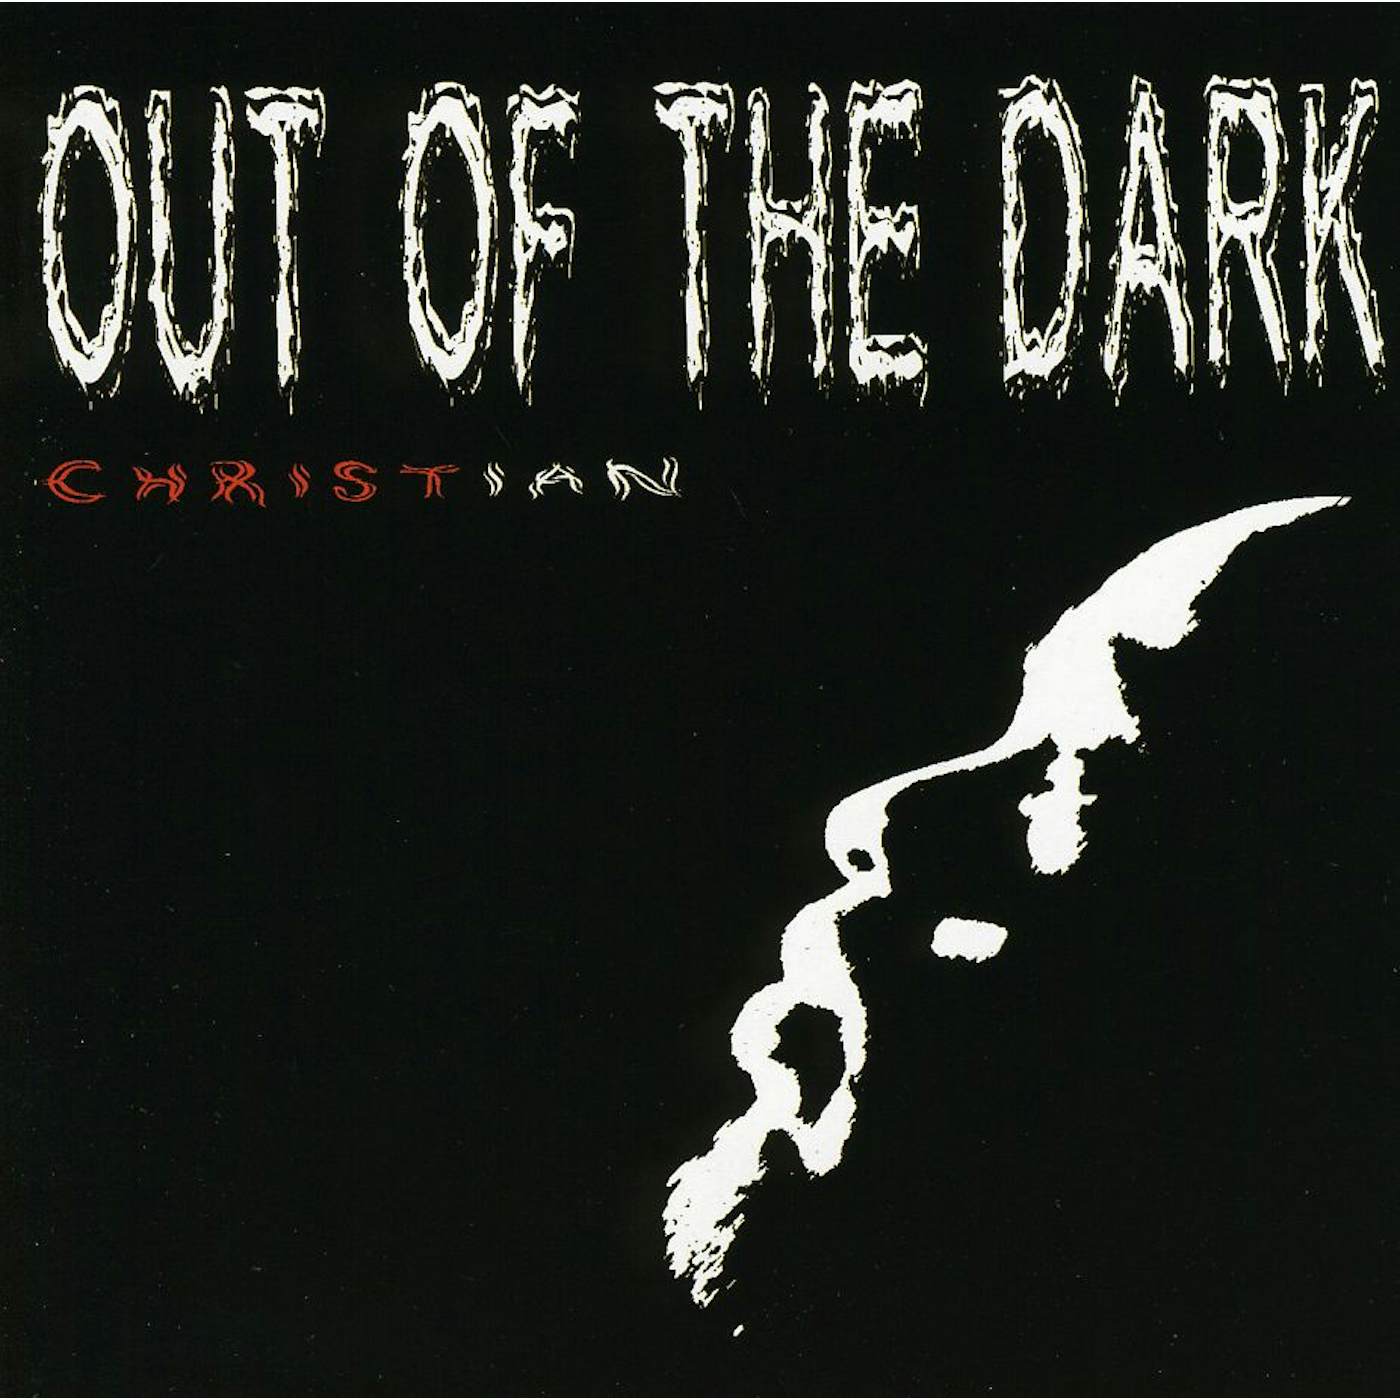 Christian OUT OF THE DARK CD